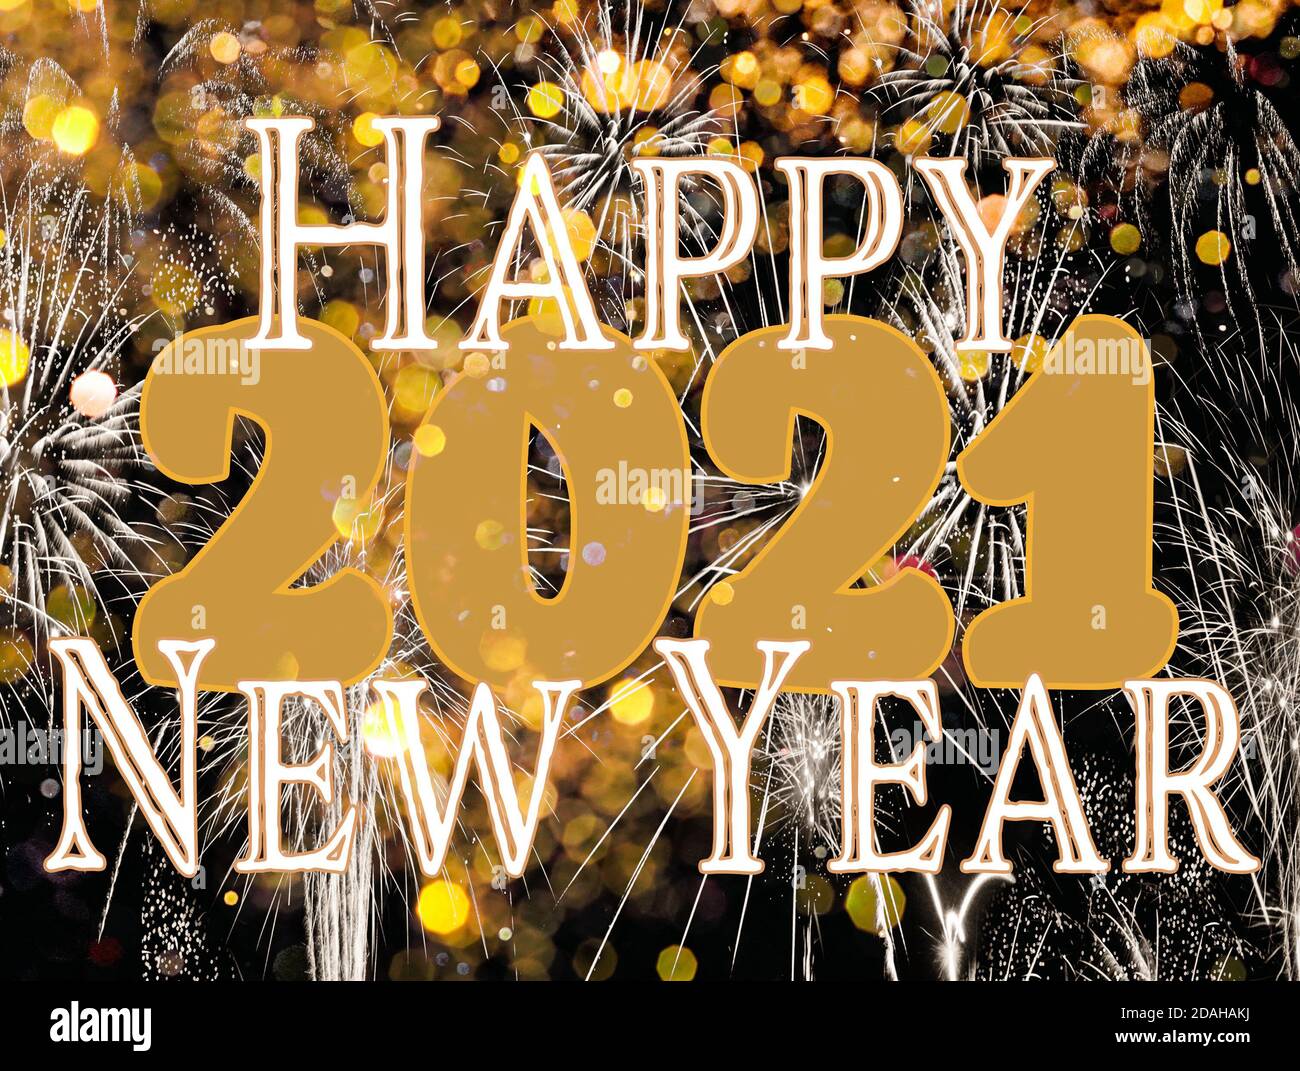 Happy New Year 2021 vintage feel black and white retro fireworks in the night sky with gold numbers typography for the new year Stock Photo